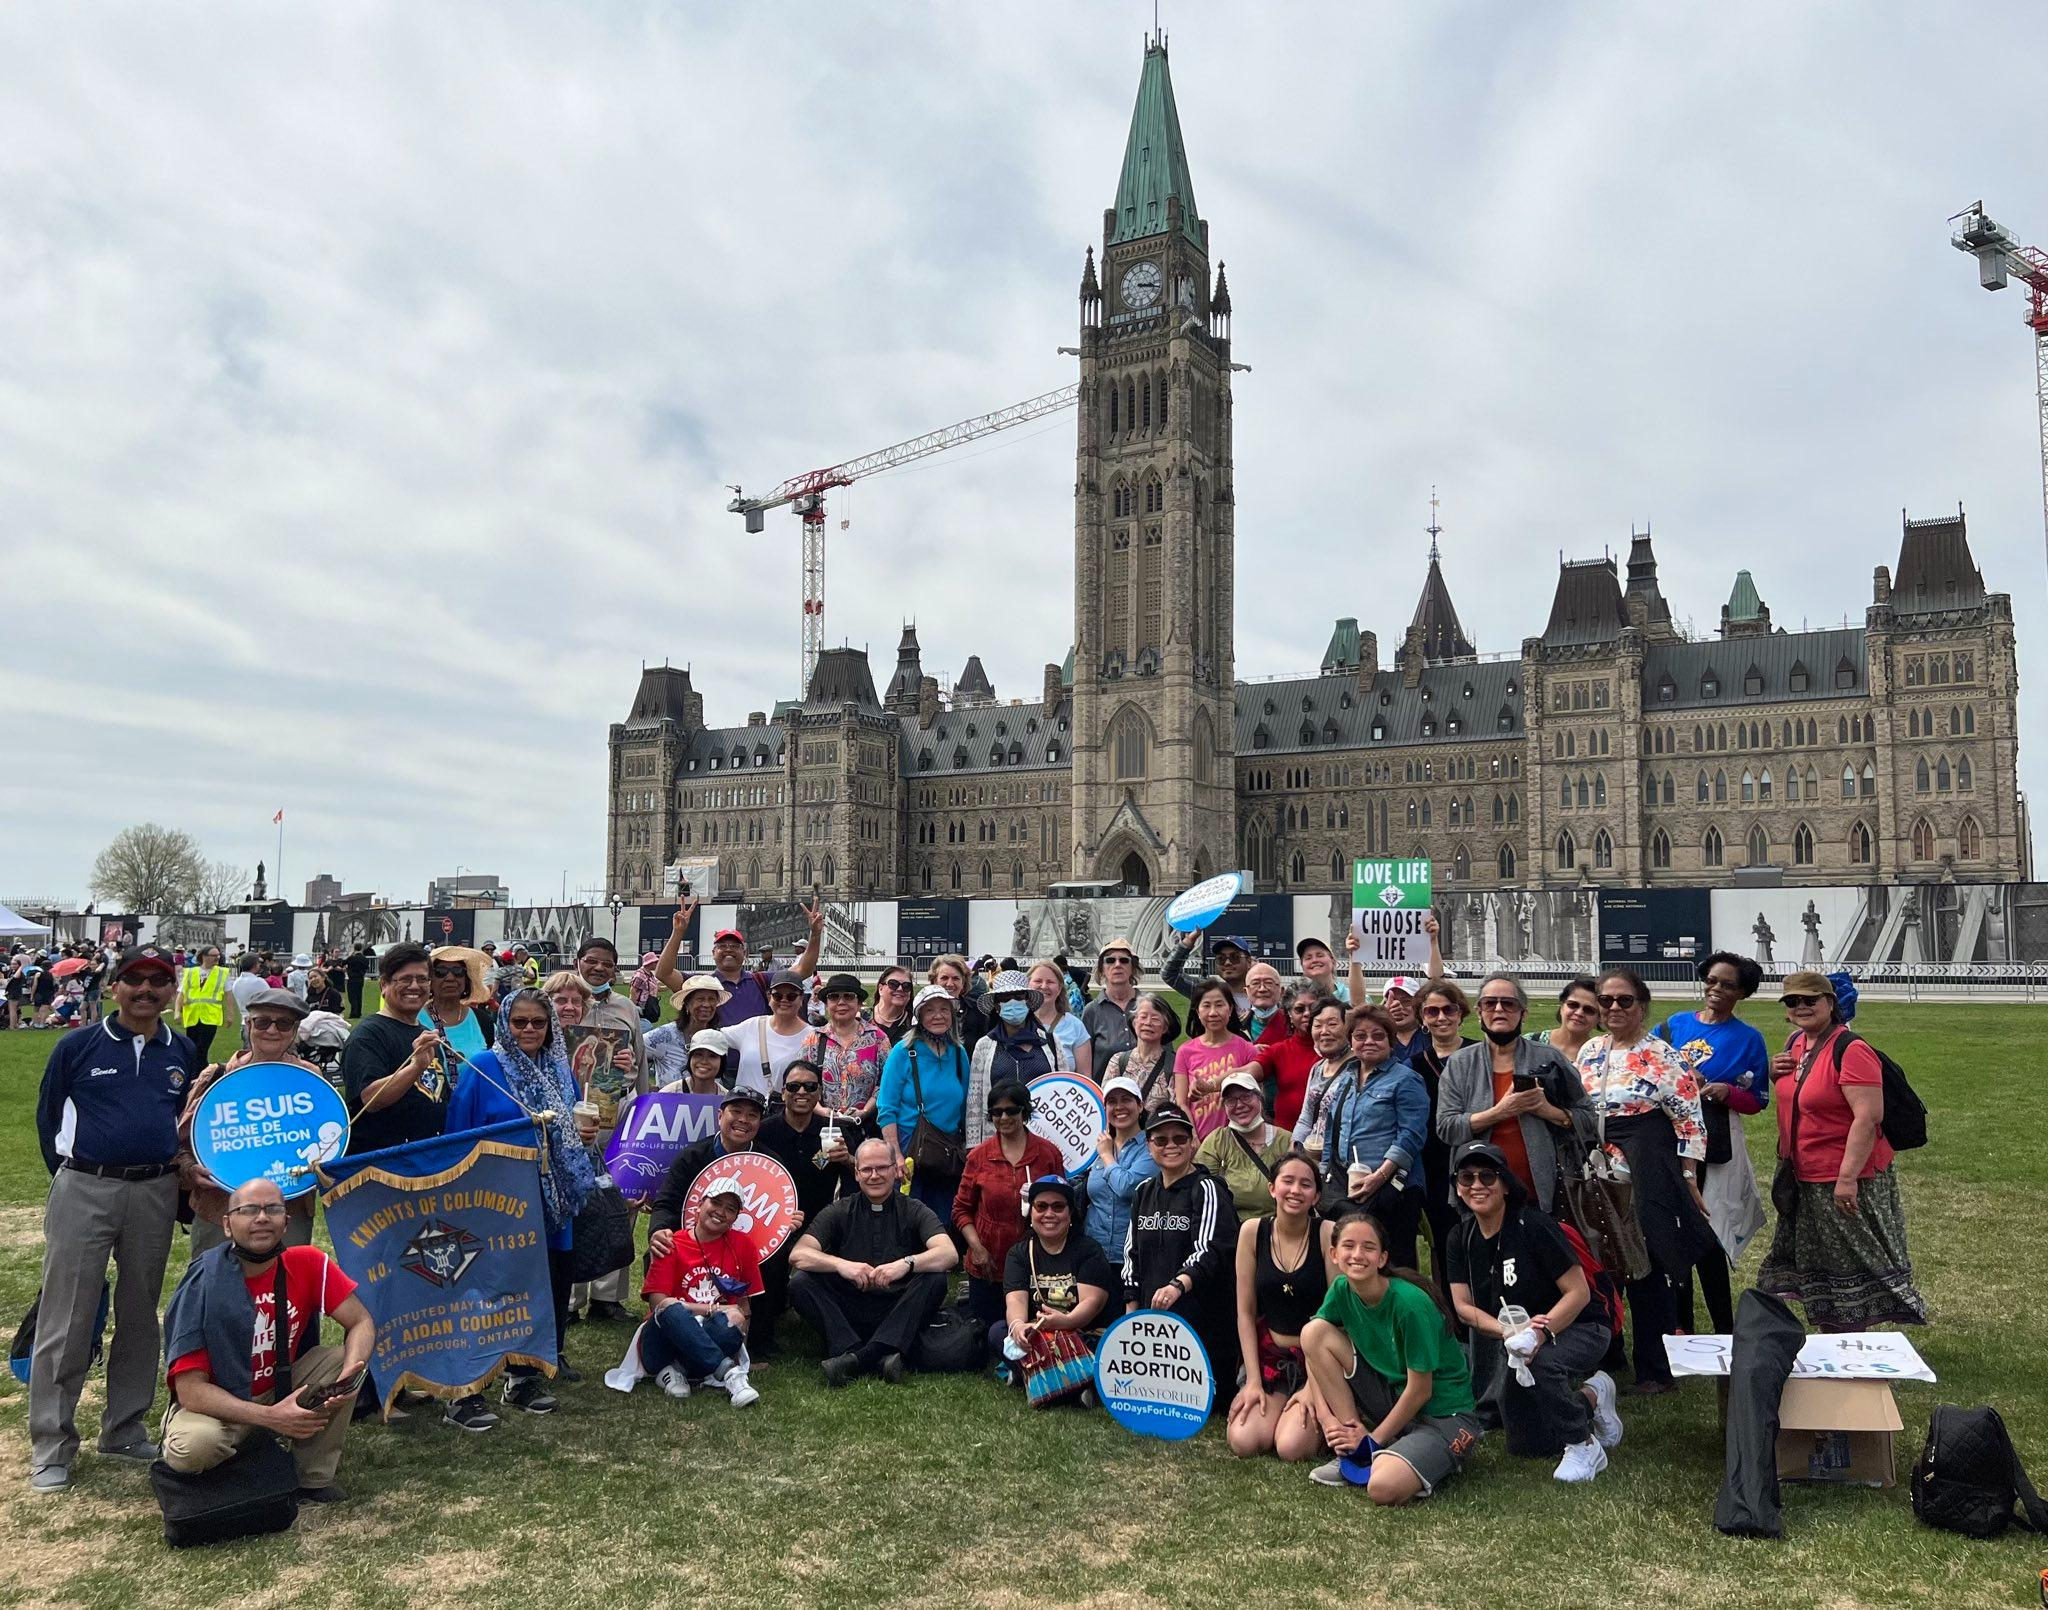 ottawa march for life group photo may 12 2022